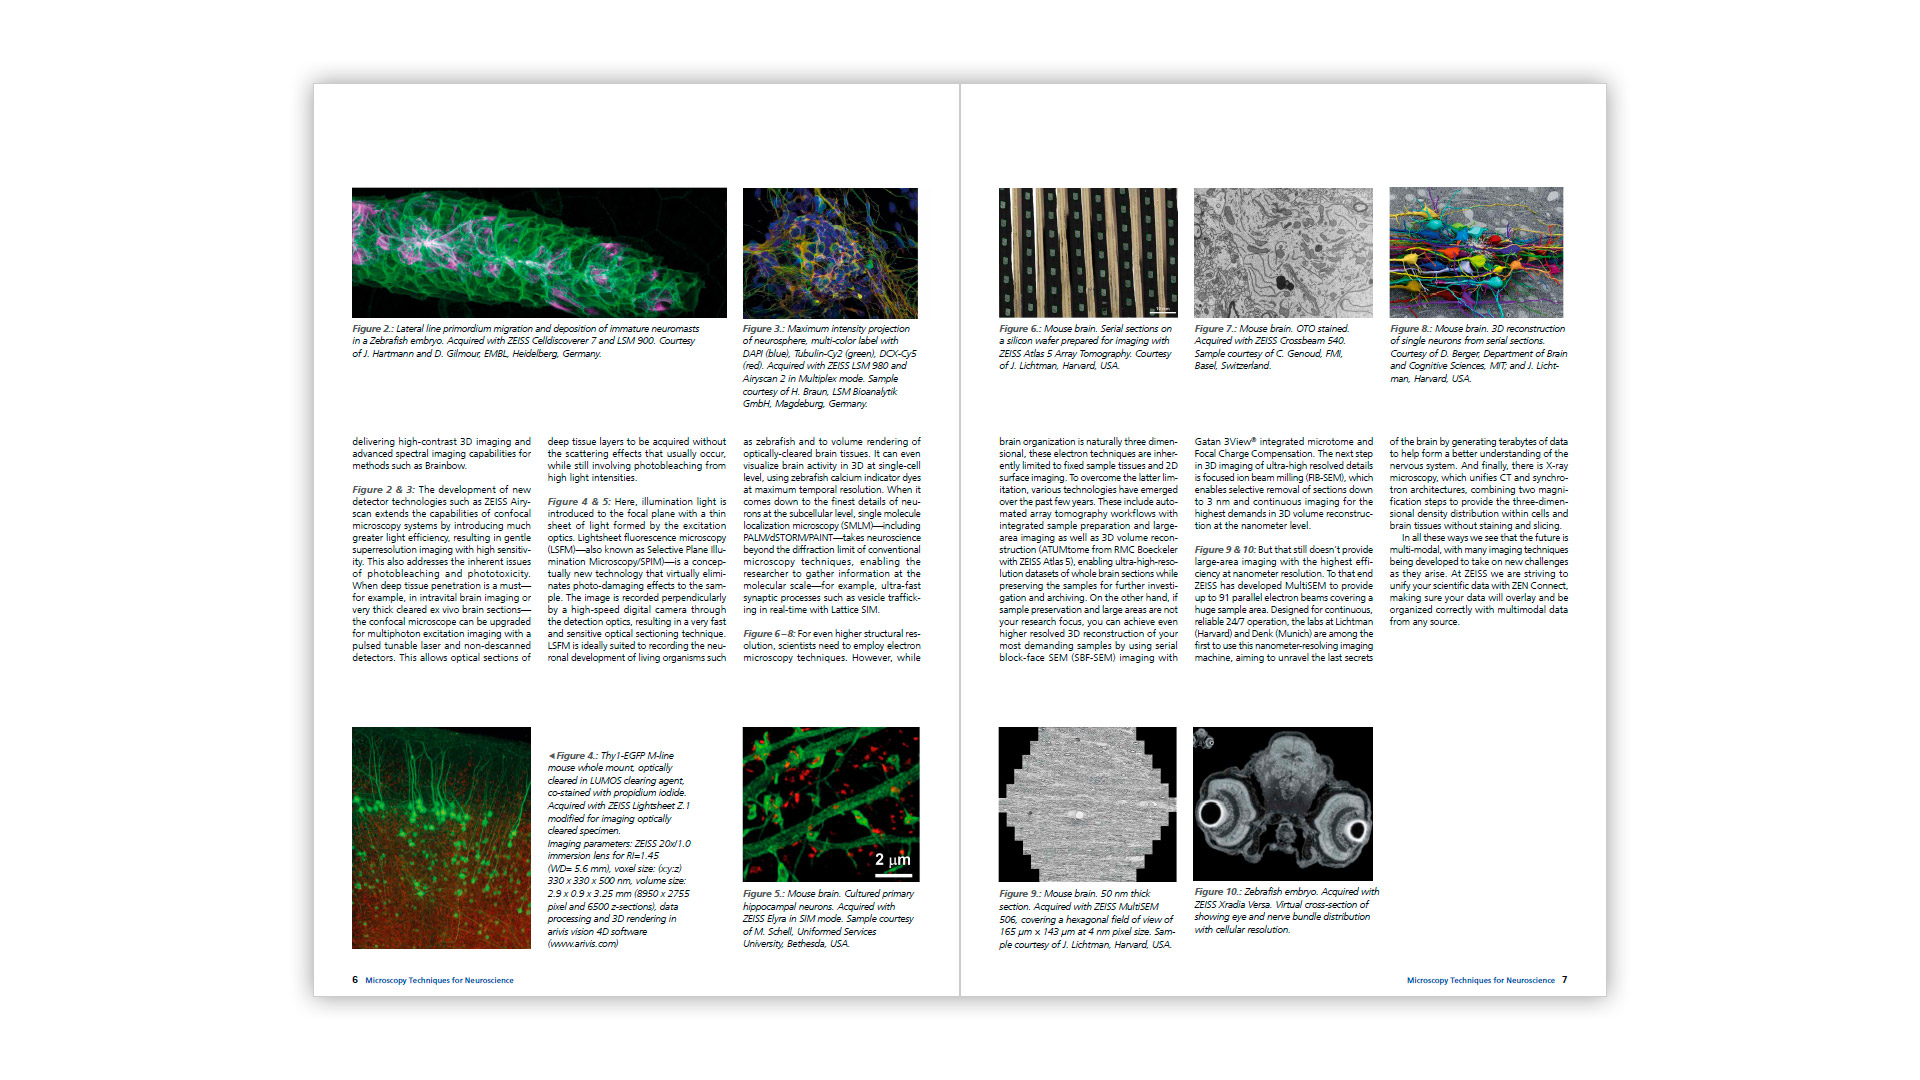 ZEISS Microscopy Techniques for Neuroscience Ebook - Preview 3